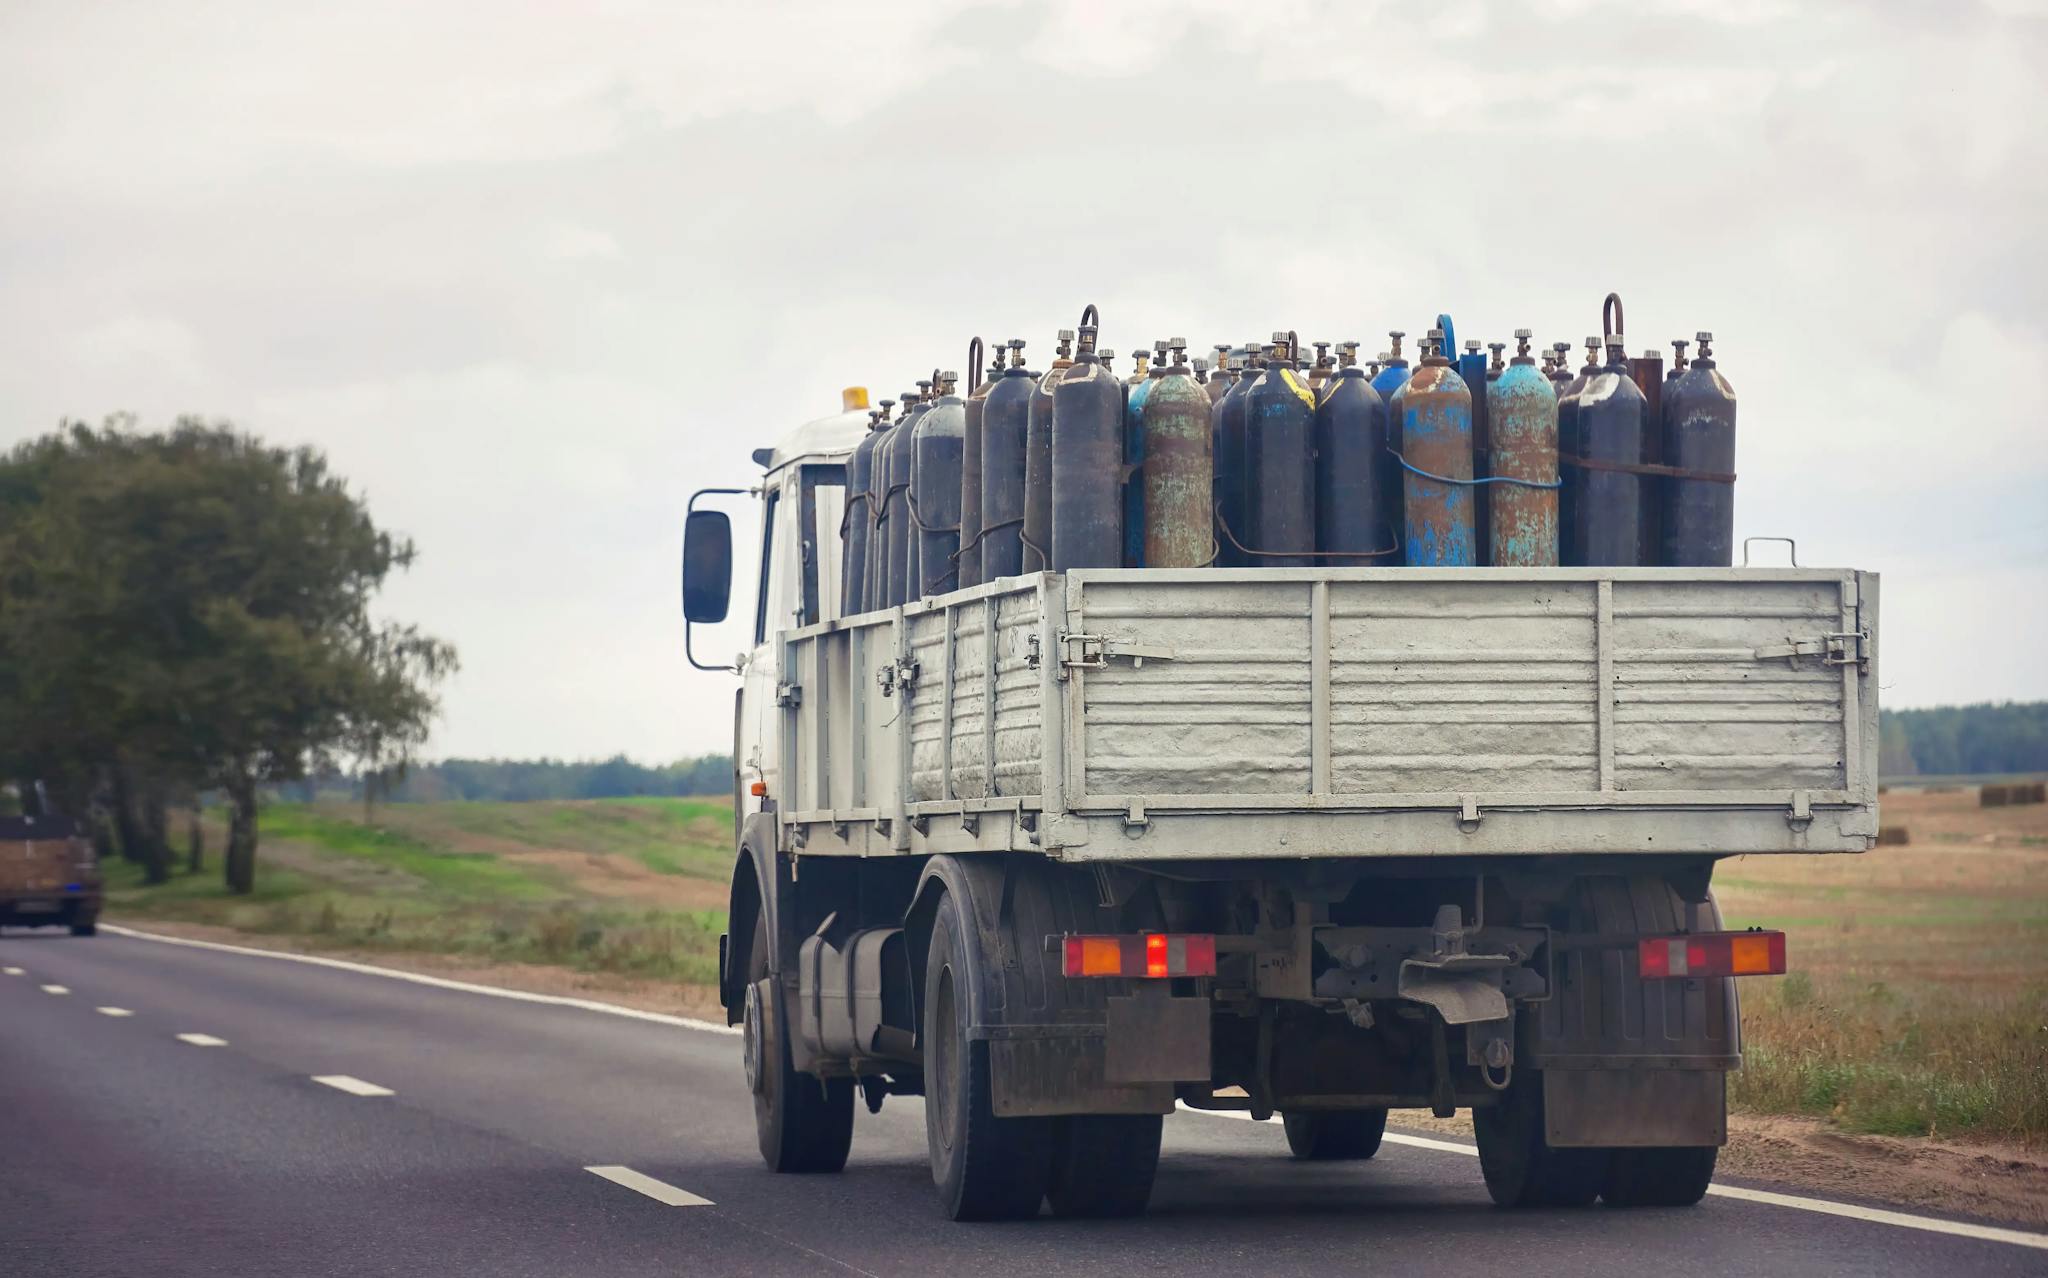 A truck transporting numerous oxygen cylinders on a country road.